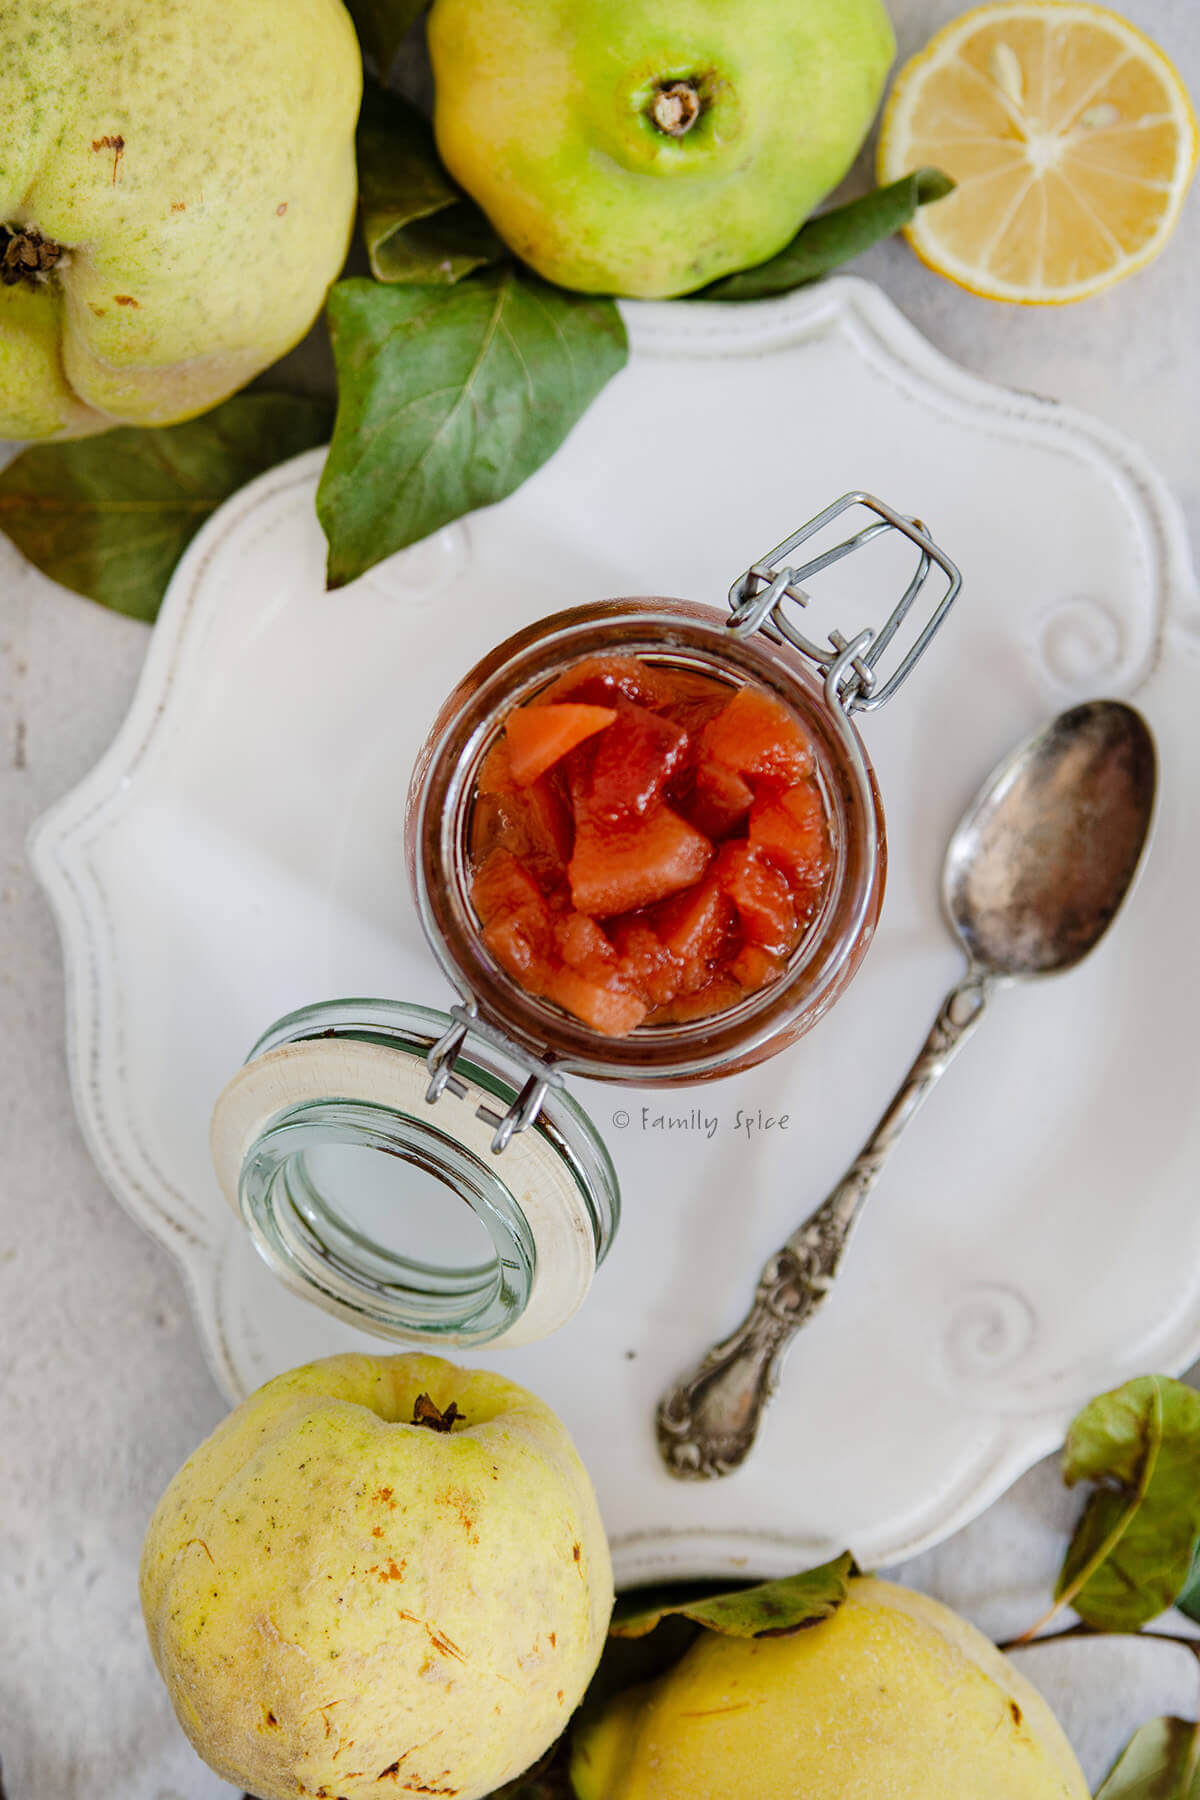 Top view of a mason jar with red quince jam on a white plate